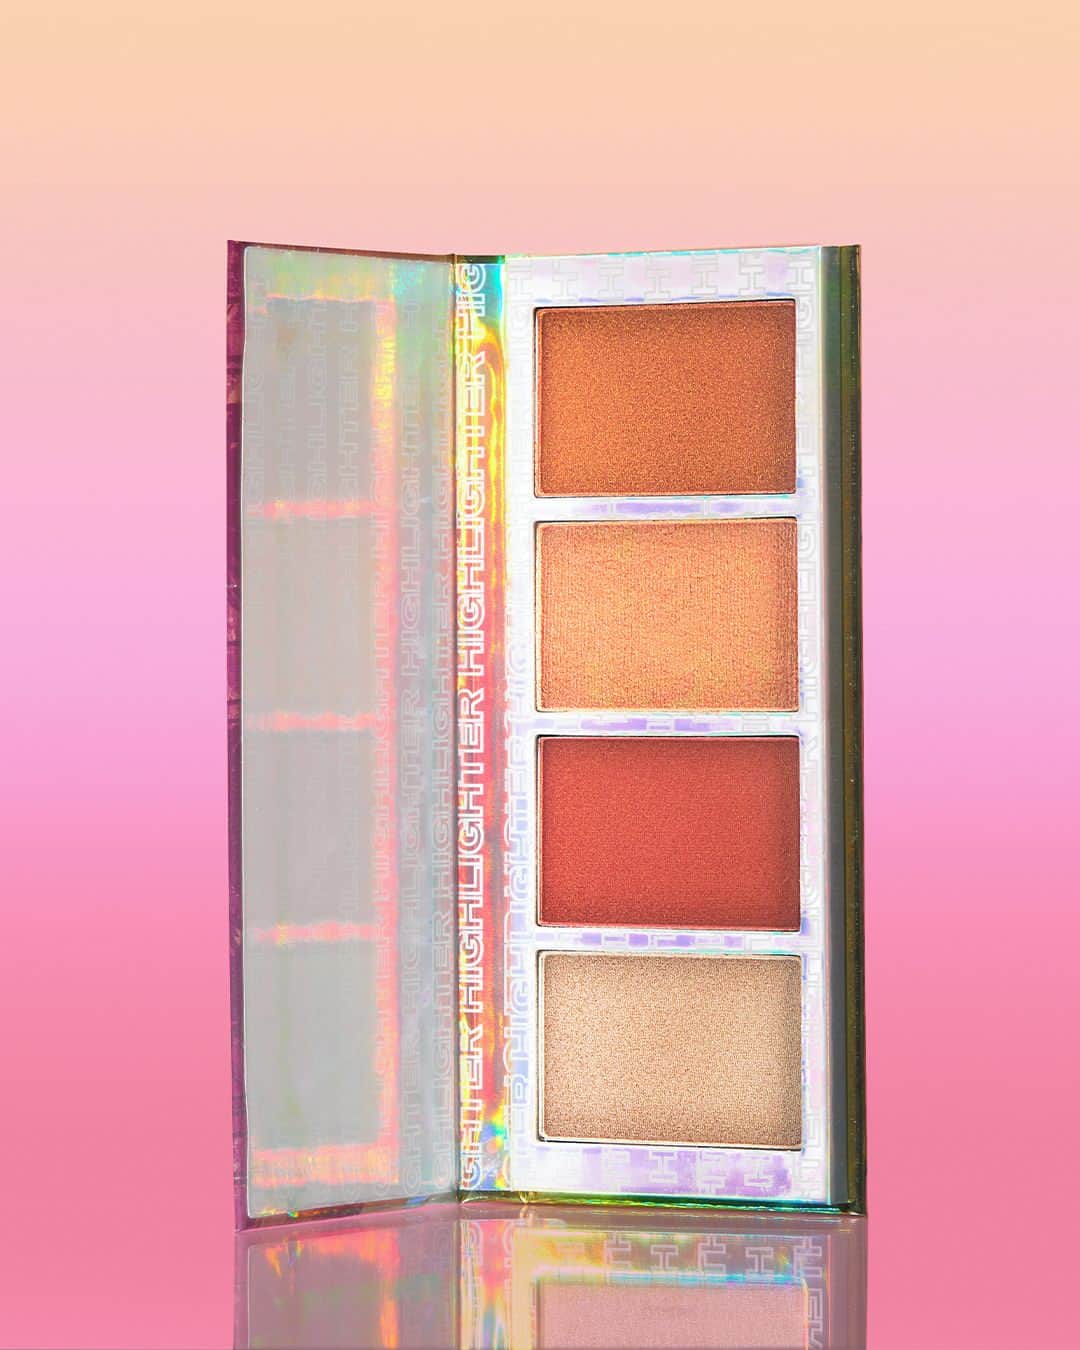 BH Cosmeticsのインスタグラム：「Golden-Hour: Activated ✔️ Introducing the ~new~ SUNSET GLOW Highlighter Palette 🌅 4 highly-pigmented warm & luminous peach hues 🍑, all made with a glisten-inducing, buttery shimmer blend that'll have all skin tones gleaming 🤩✨⁣⁣ ⁣⁣ A simple sweep onto the cheeks, chin and nose will get ya that coveted, sun-kissed flush perfect for IG posts, beach vacays, business meetings & everything in between!⁣⁣ ⁣⁣ 🌱 Vegan 🐰 Cruelty-Free 🧼 Clean Ingredients⁣⁣ ⁣⁣ #bhcosmetics」